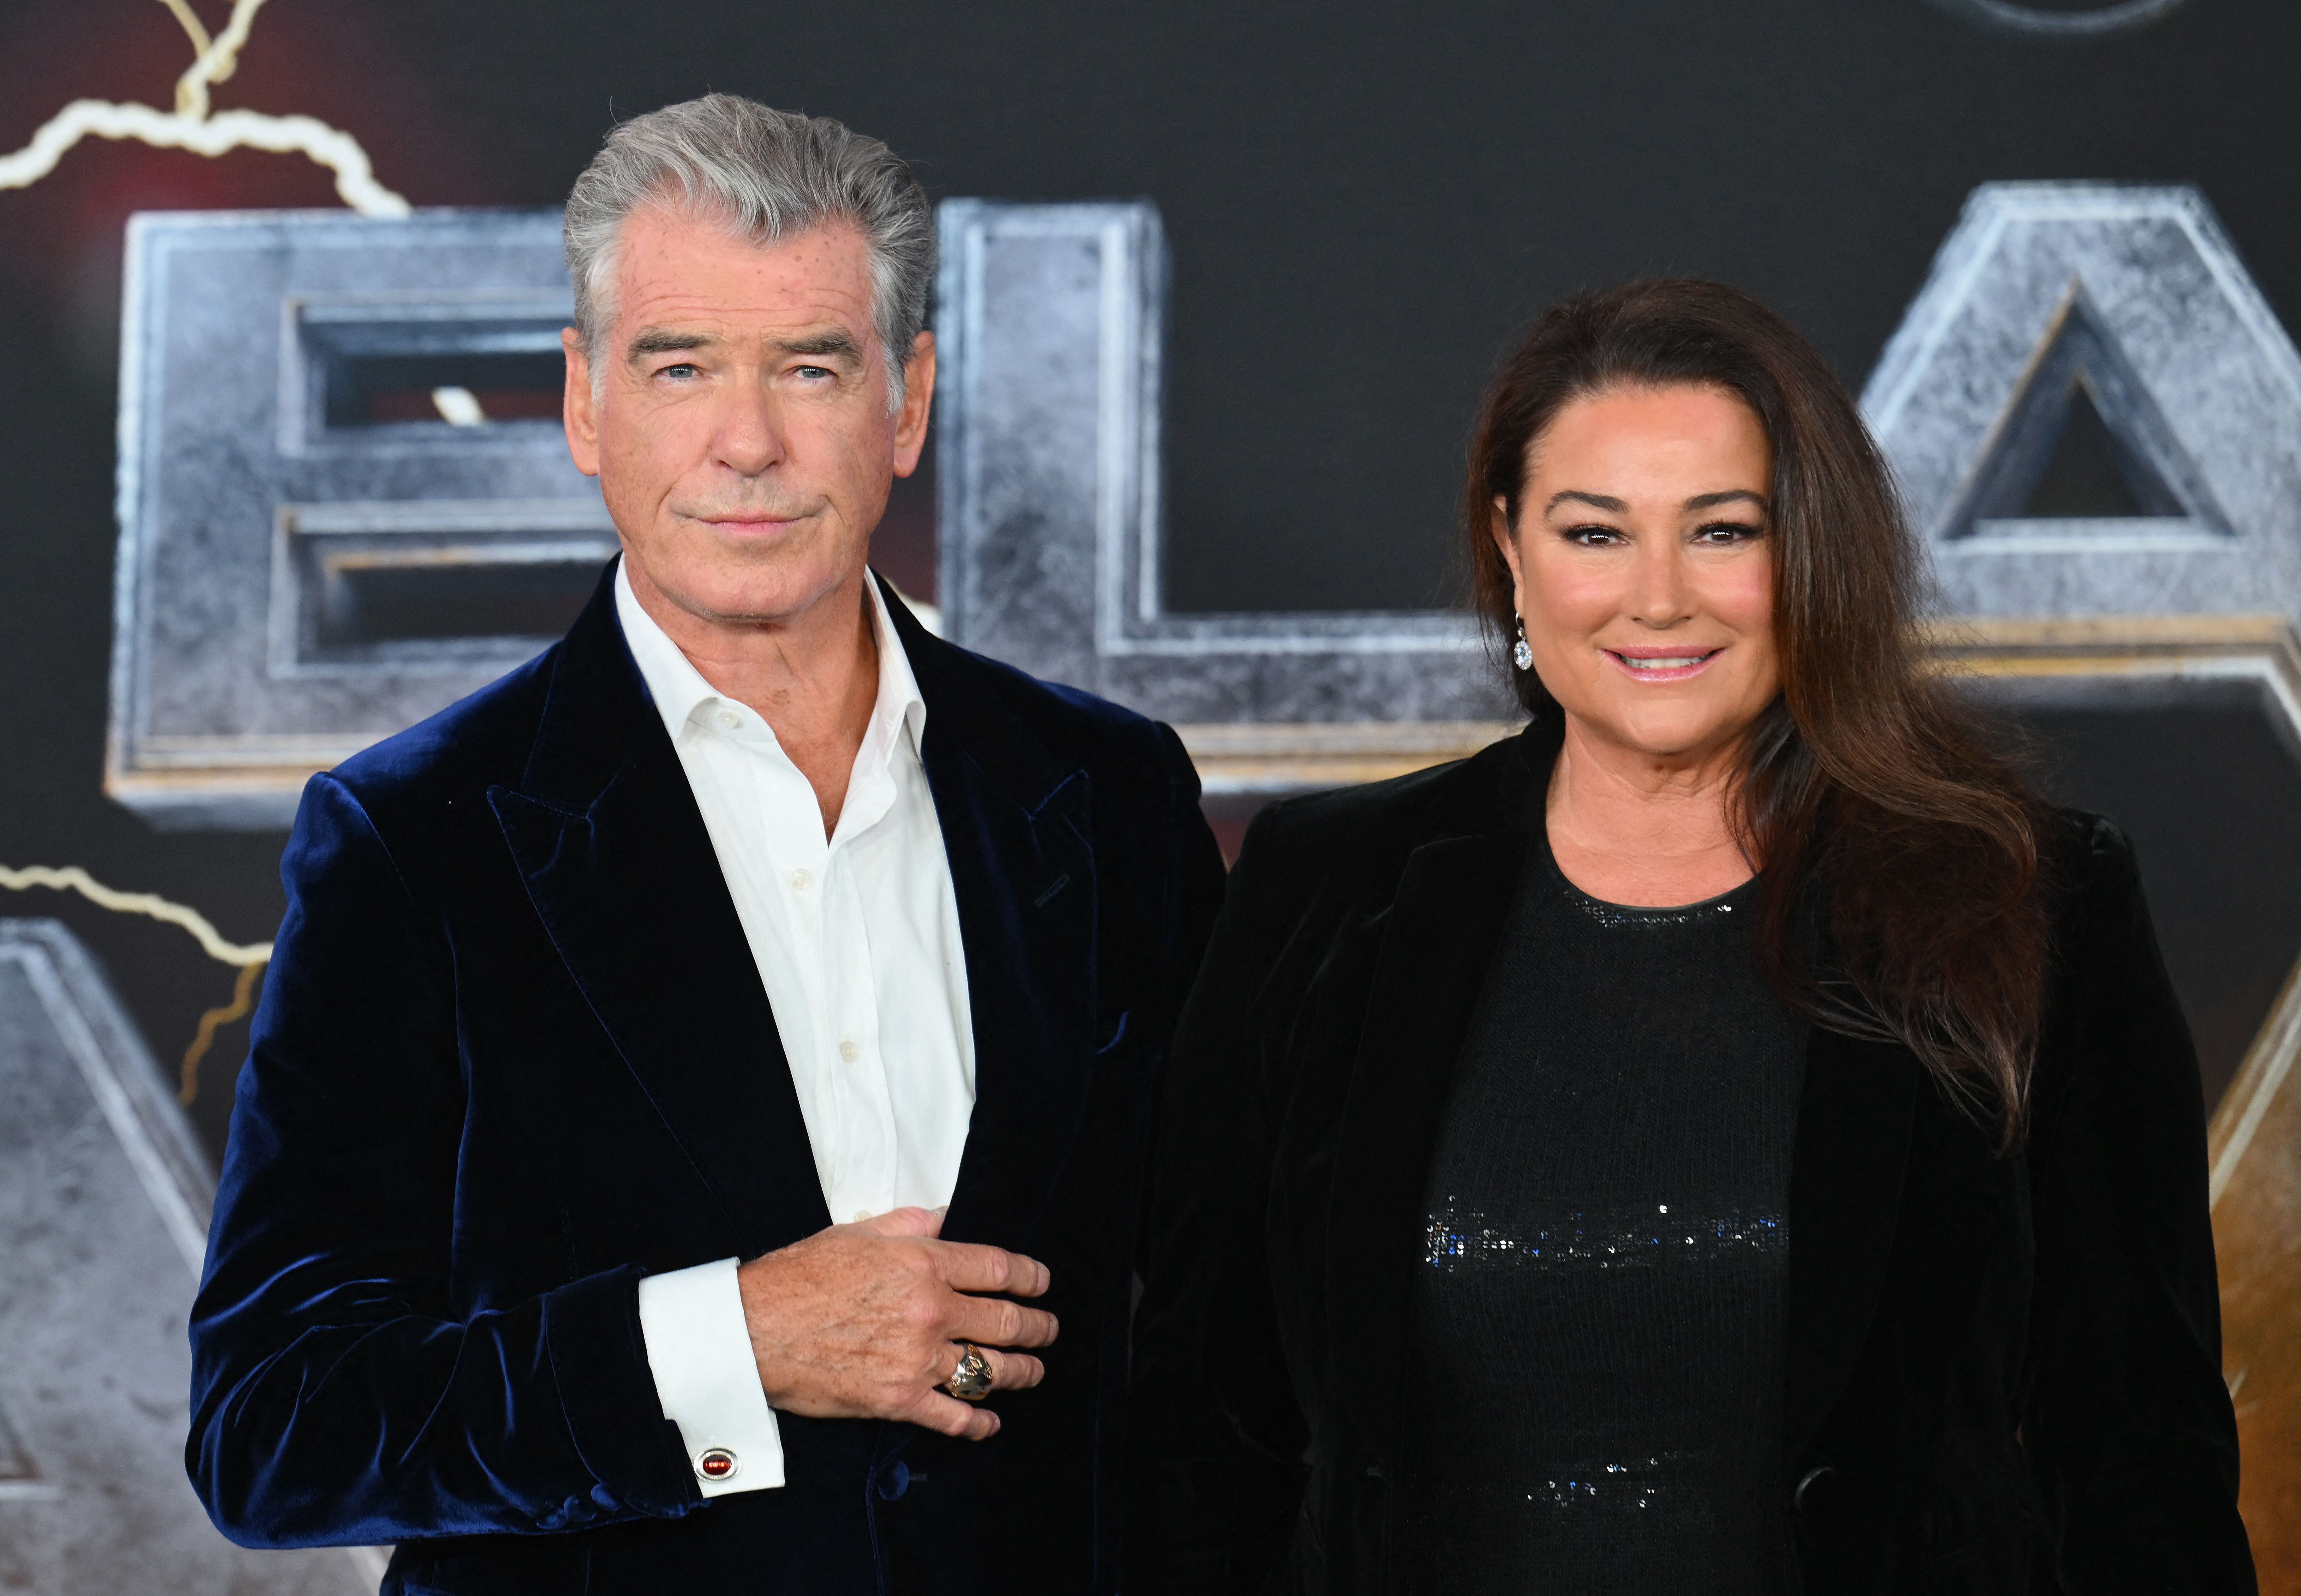 Irish Actor Pierce Brosnan (L) and his wife Keely Shaye Smith arrive for the premiere of "Black Adam" at Time Square, in New York City, on October 12, 2022. | Source: Getty Images